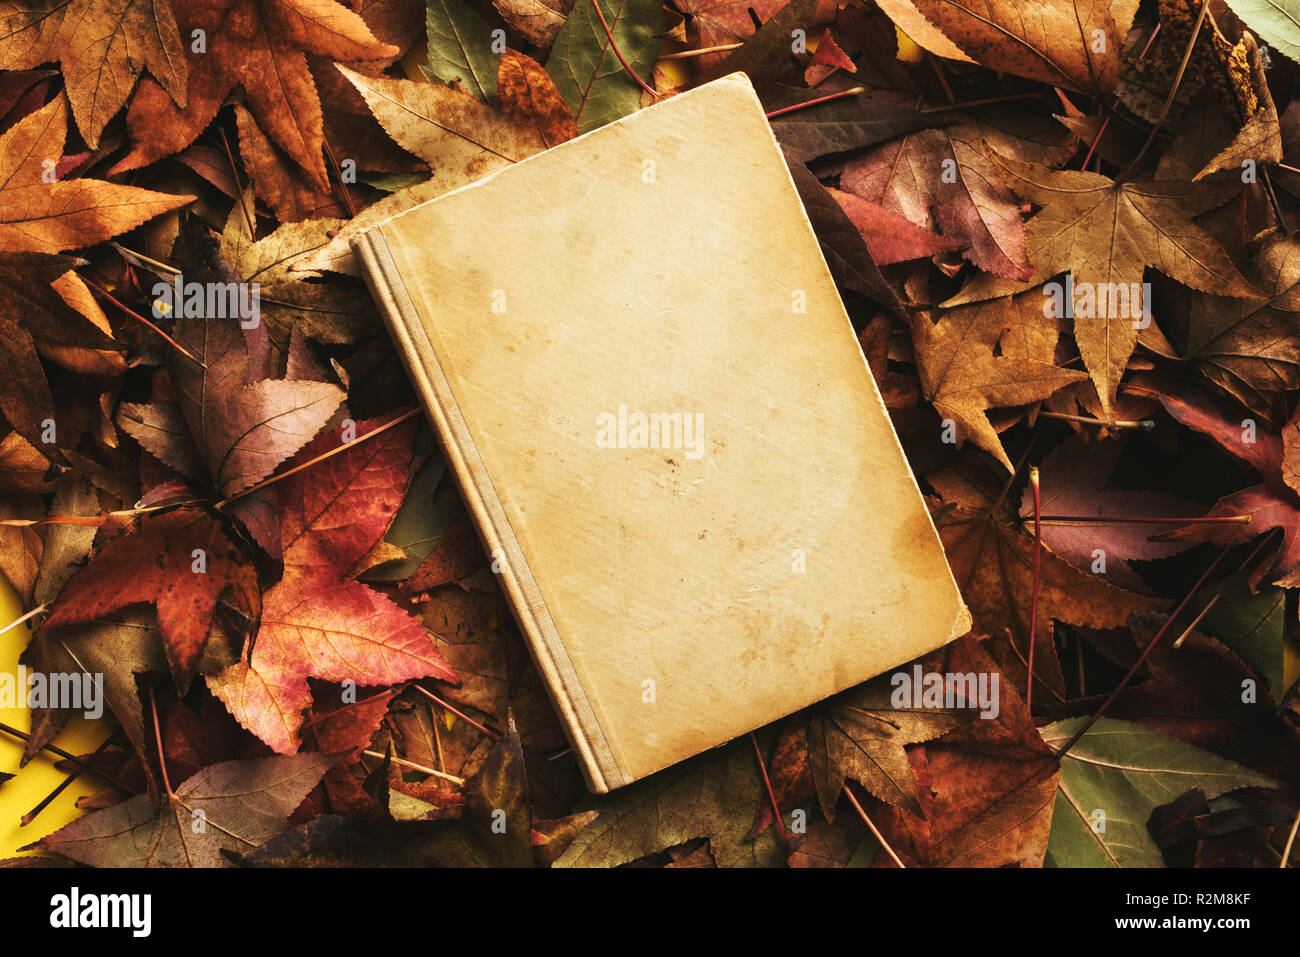 Old book and autumn leaves, fall season concept Stock Photo